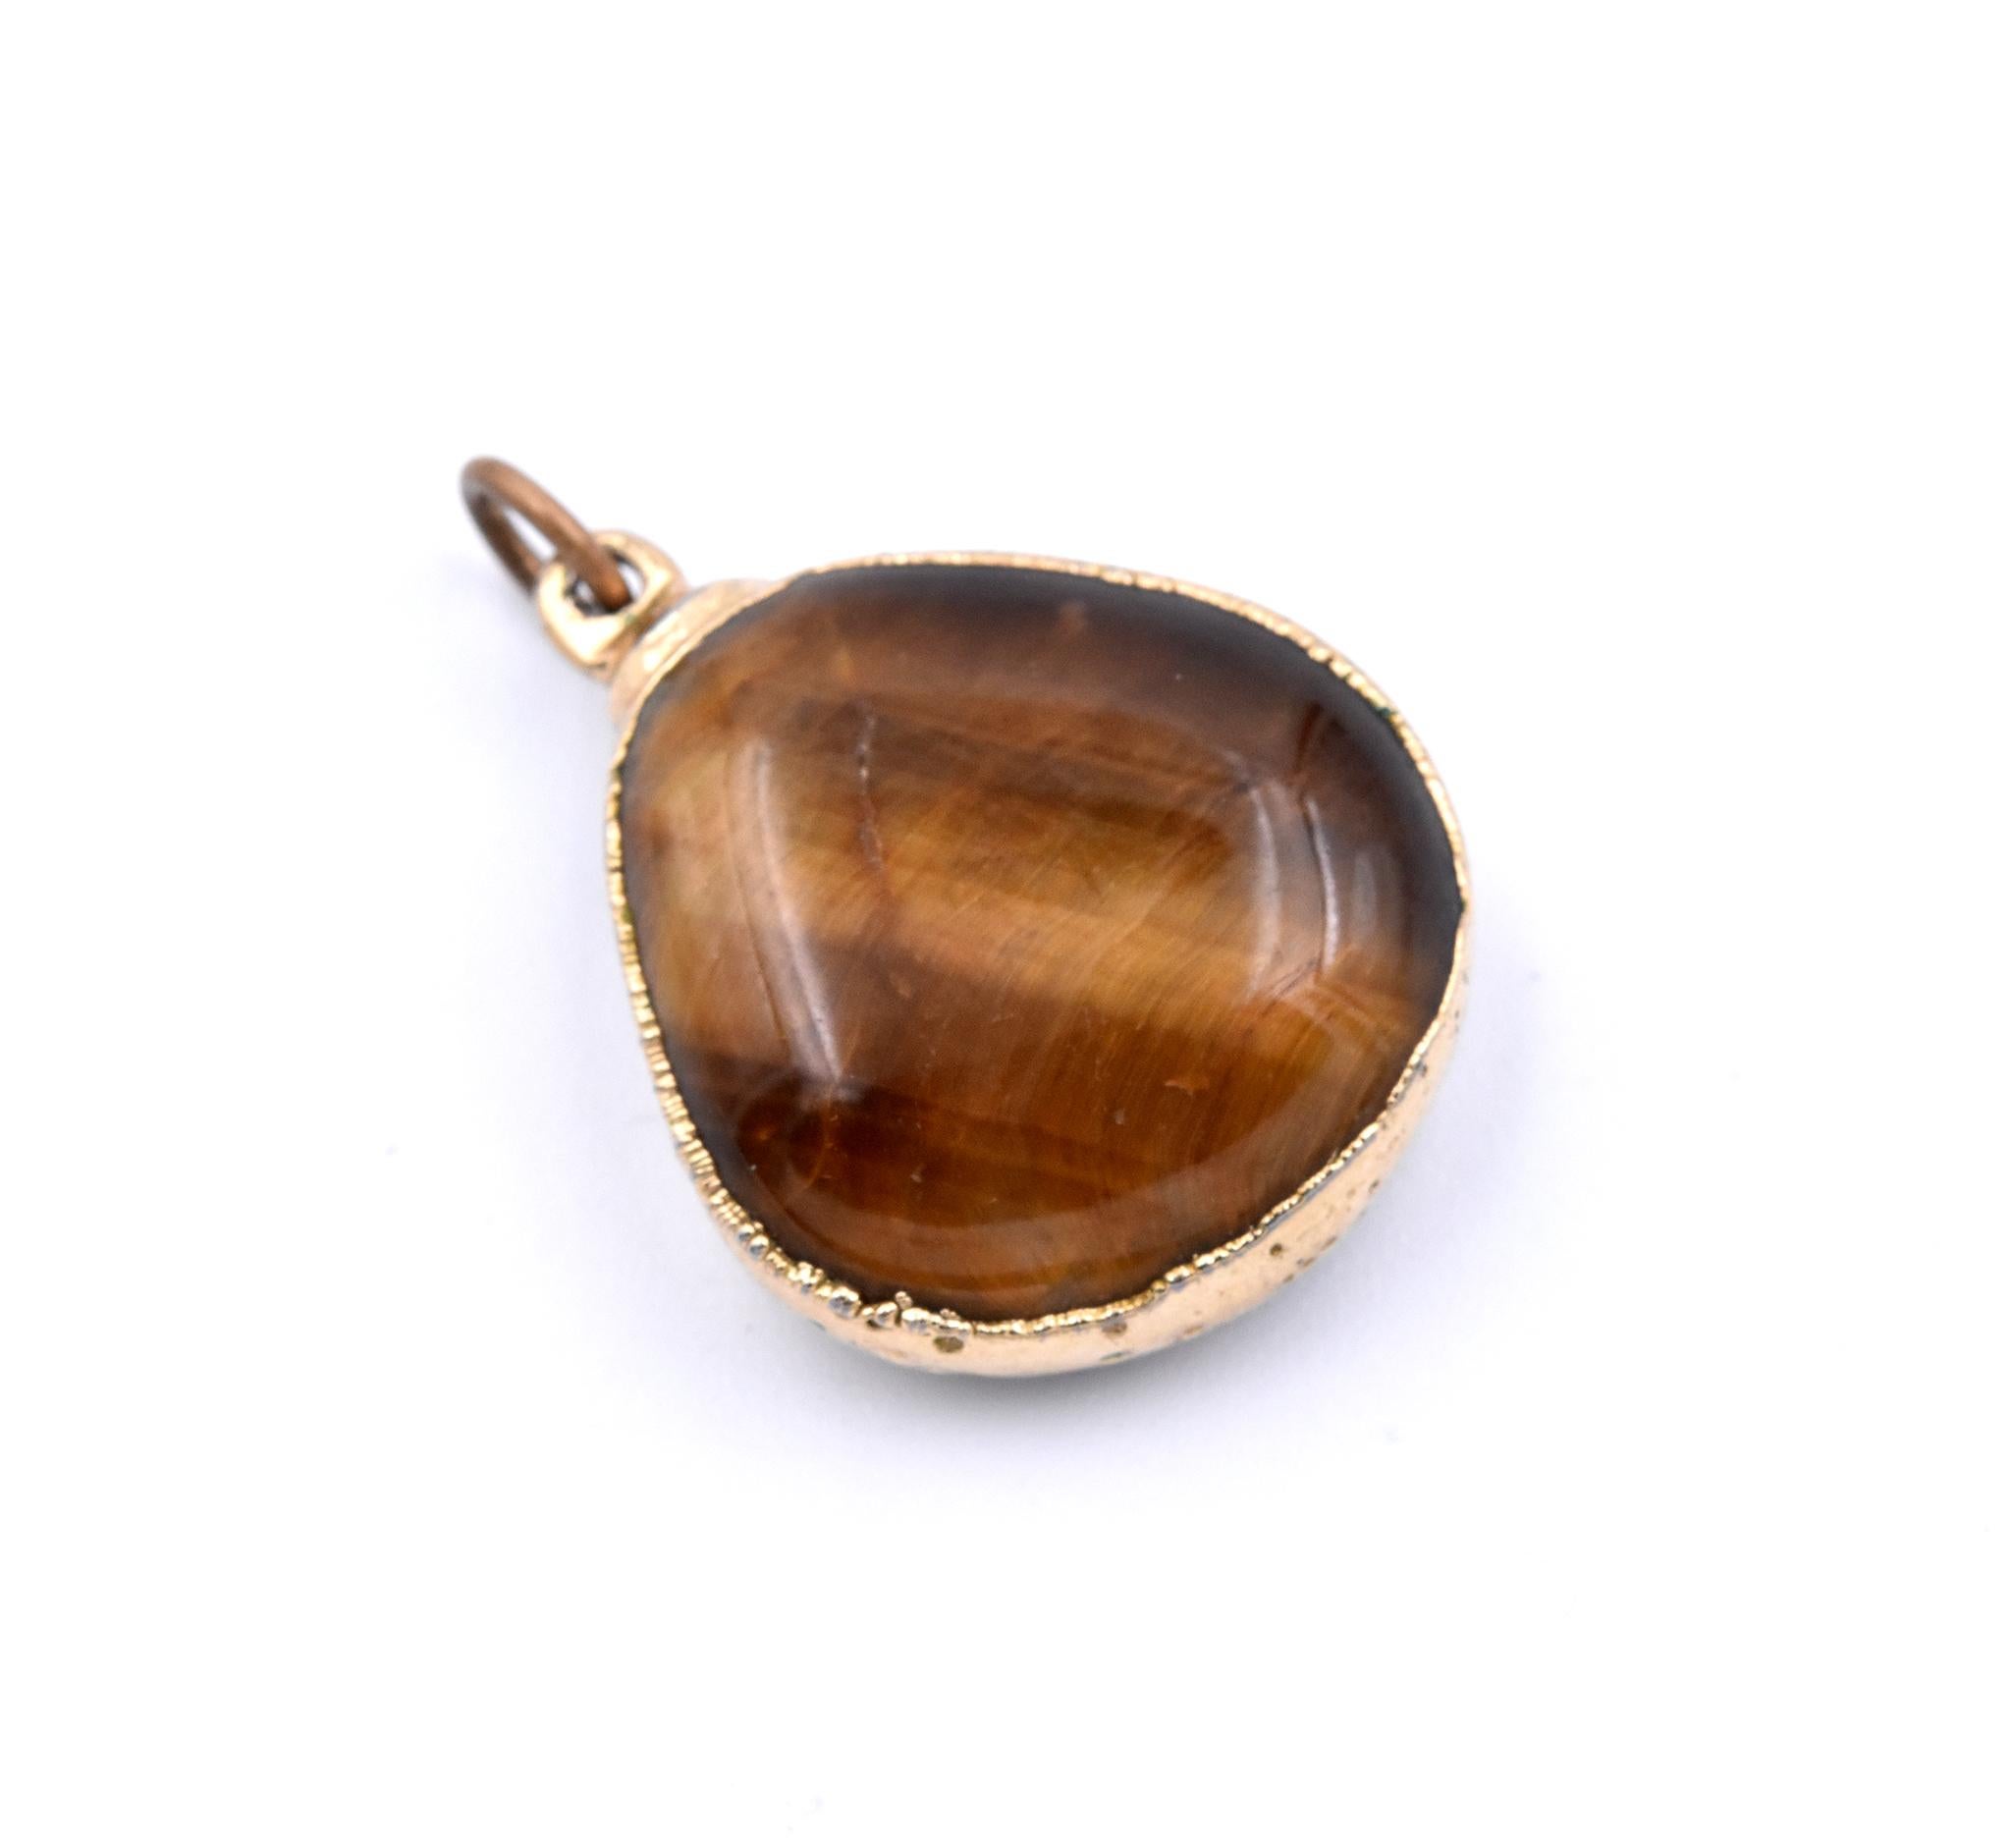 Designer: Custom Design
Material: 14k yellow gold and tiger’s eye
Dimensions: the pendant measures 19.55mm x 27.70mm
Weight: 5.3 grams	
